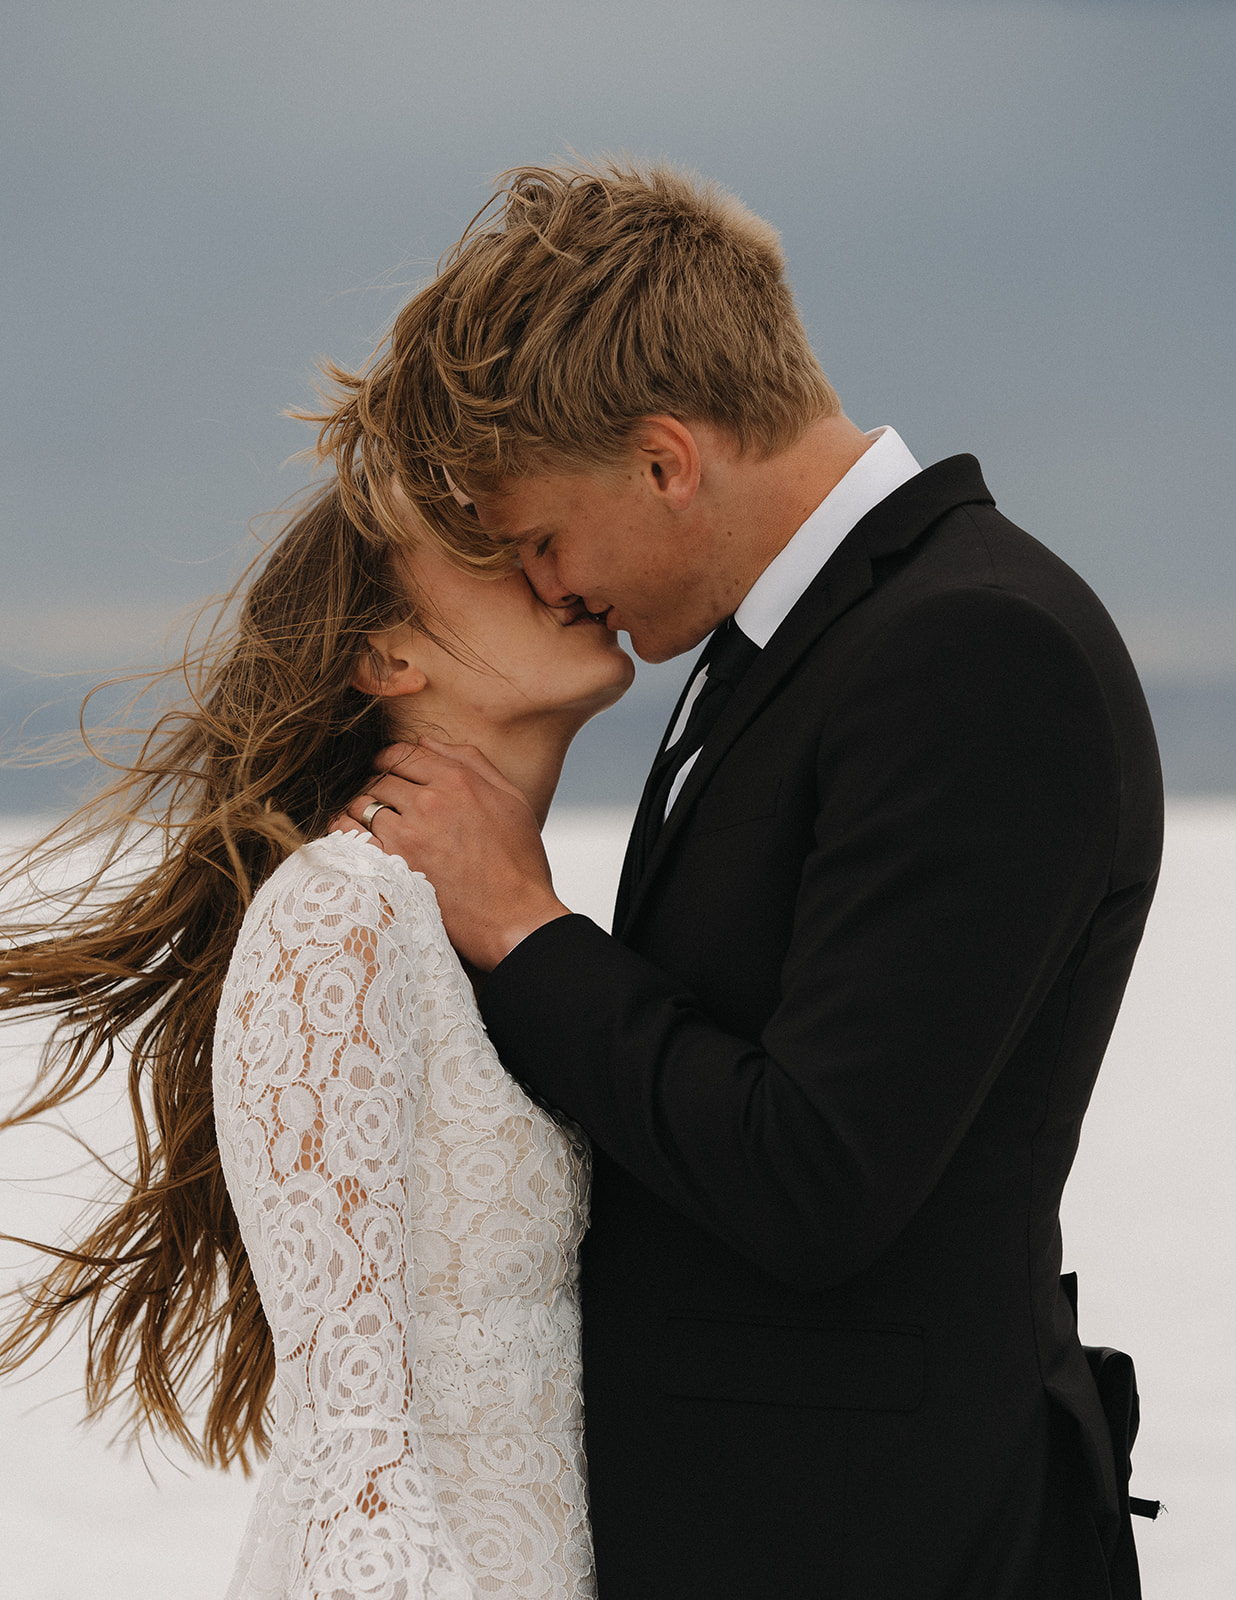 NEwlyweds kiss in a black suit and white lace dress